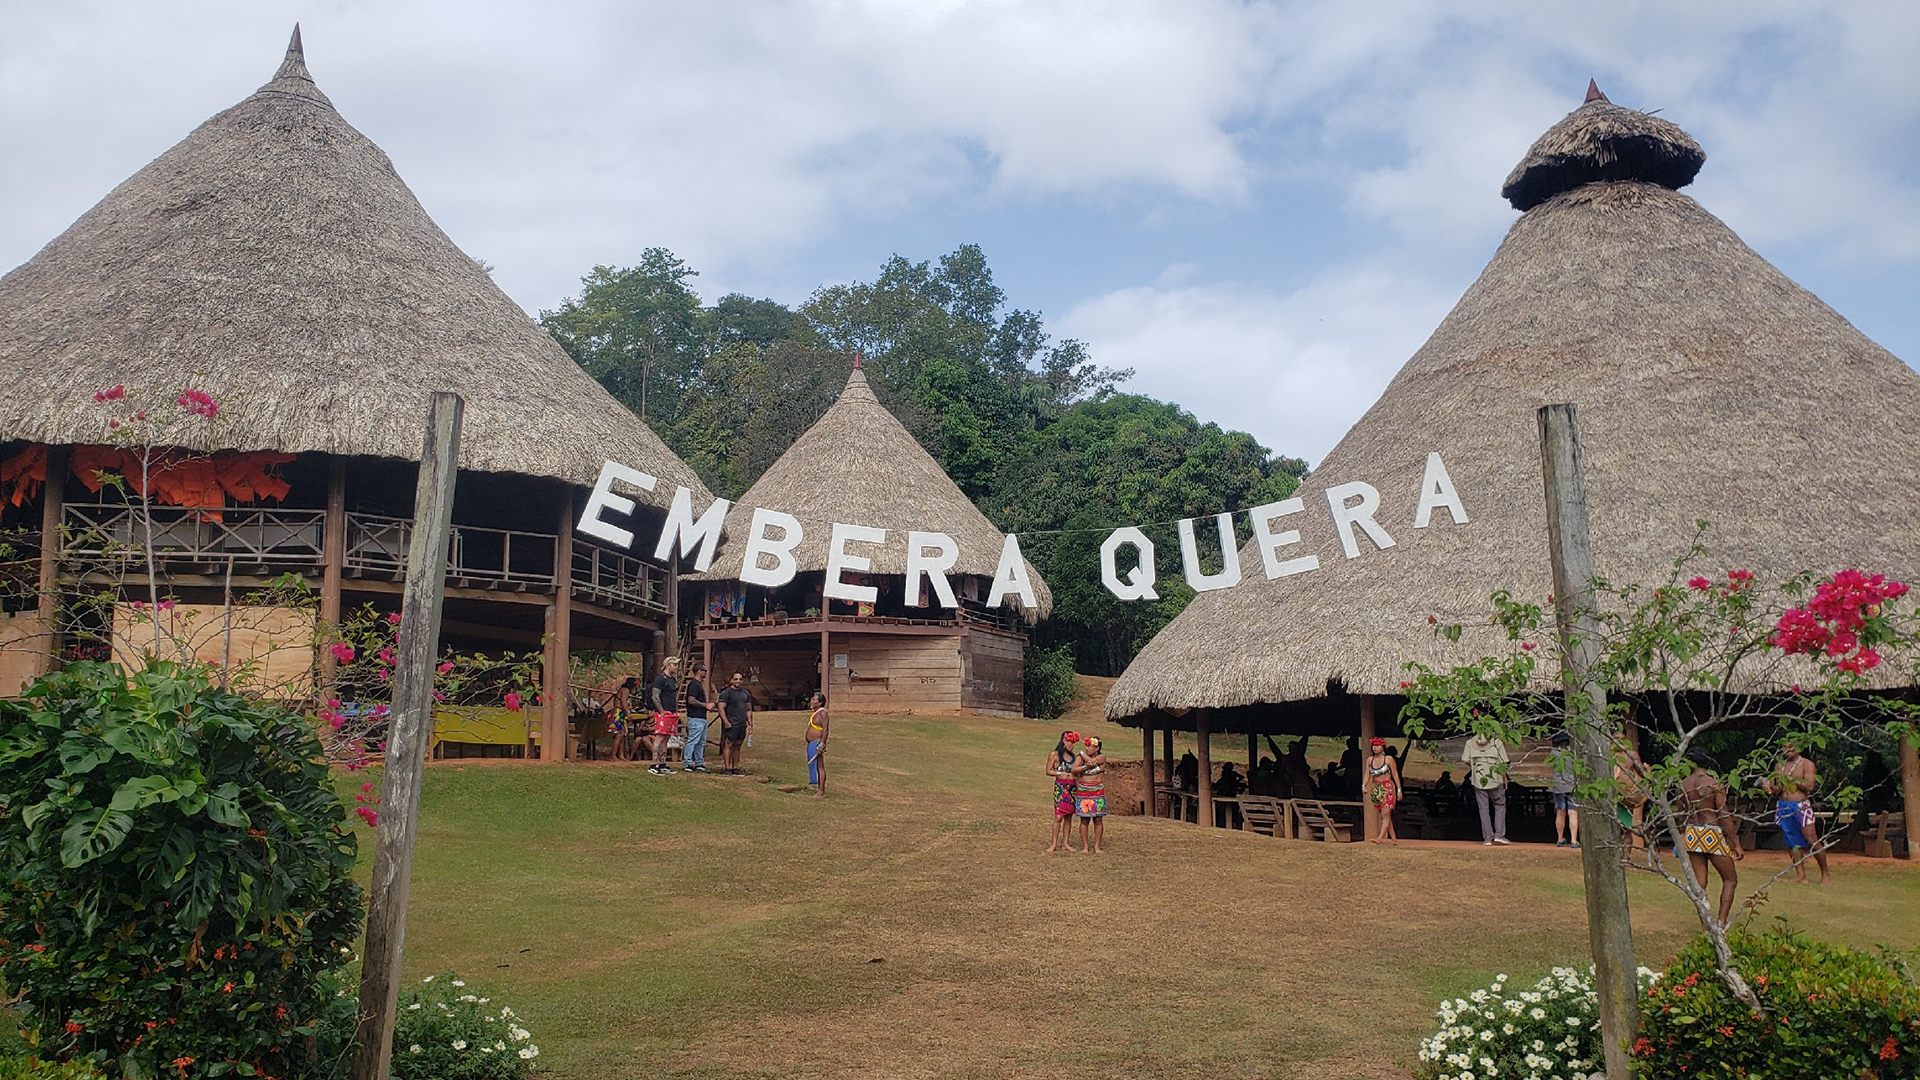 Three thatched huts in a landscape in Embera Quera, Panama. Tourists and hosts stand scattered in the scene.